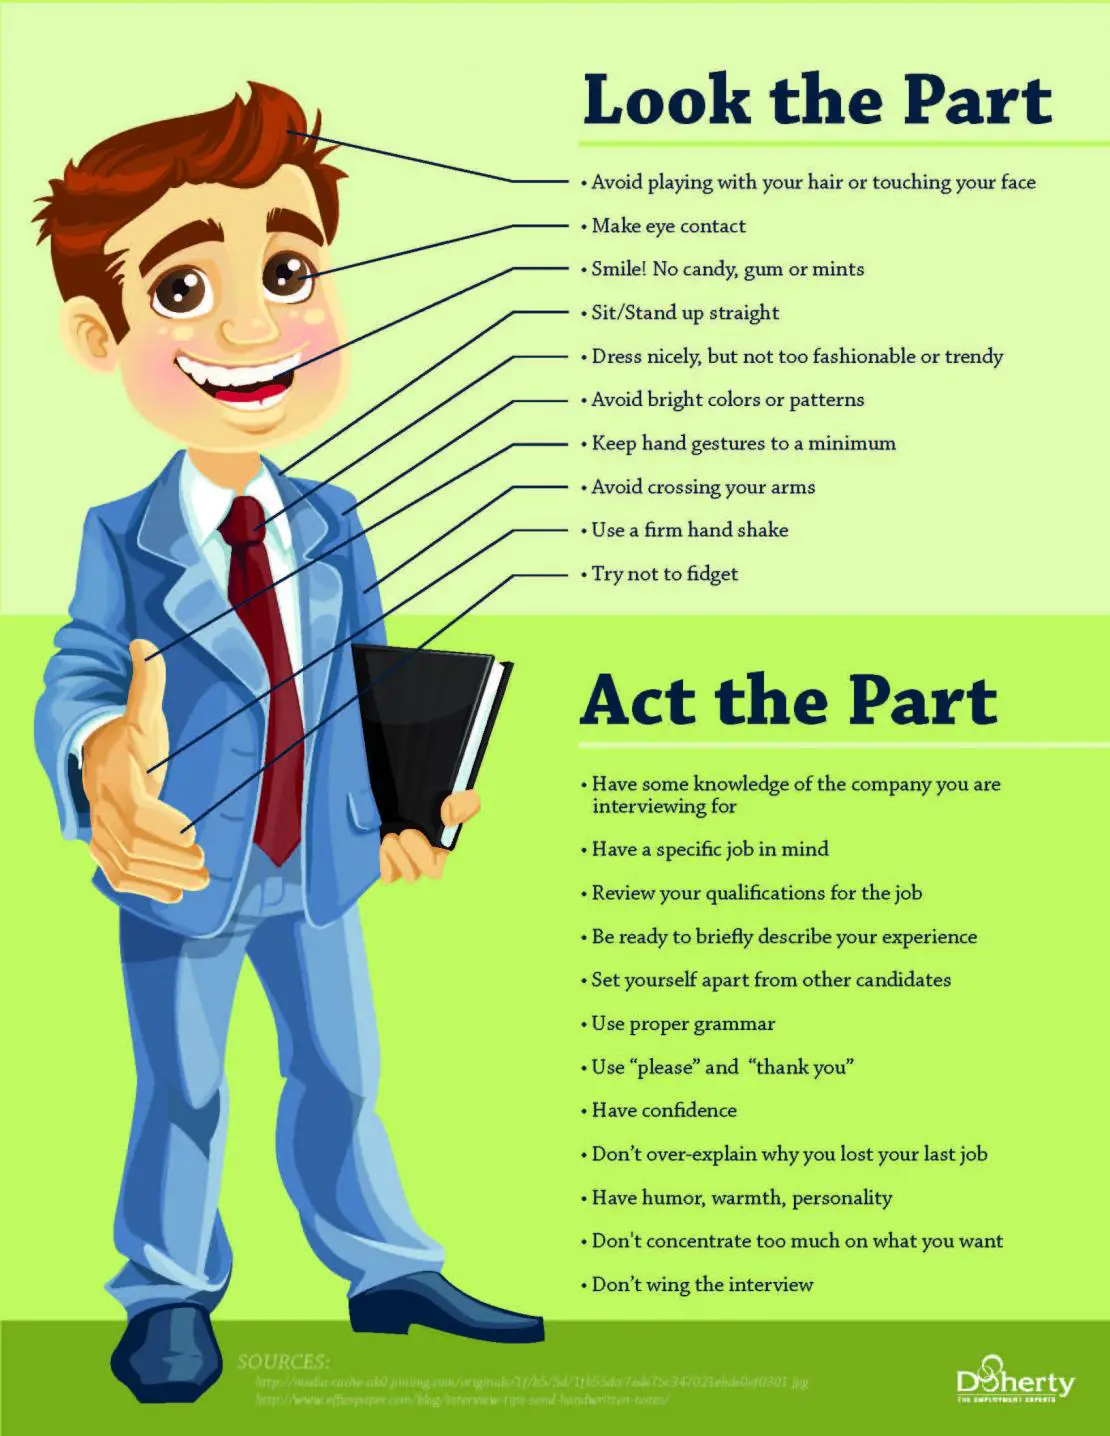 Look the Part &  Act the Part: How to prep for your job ...